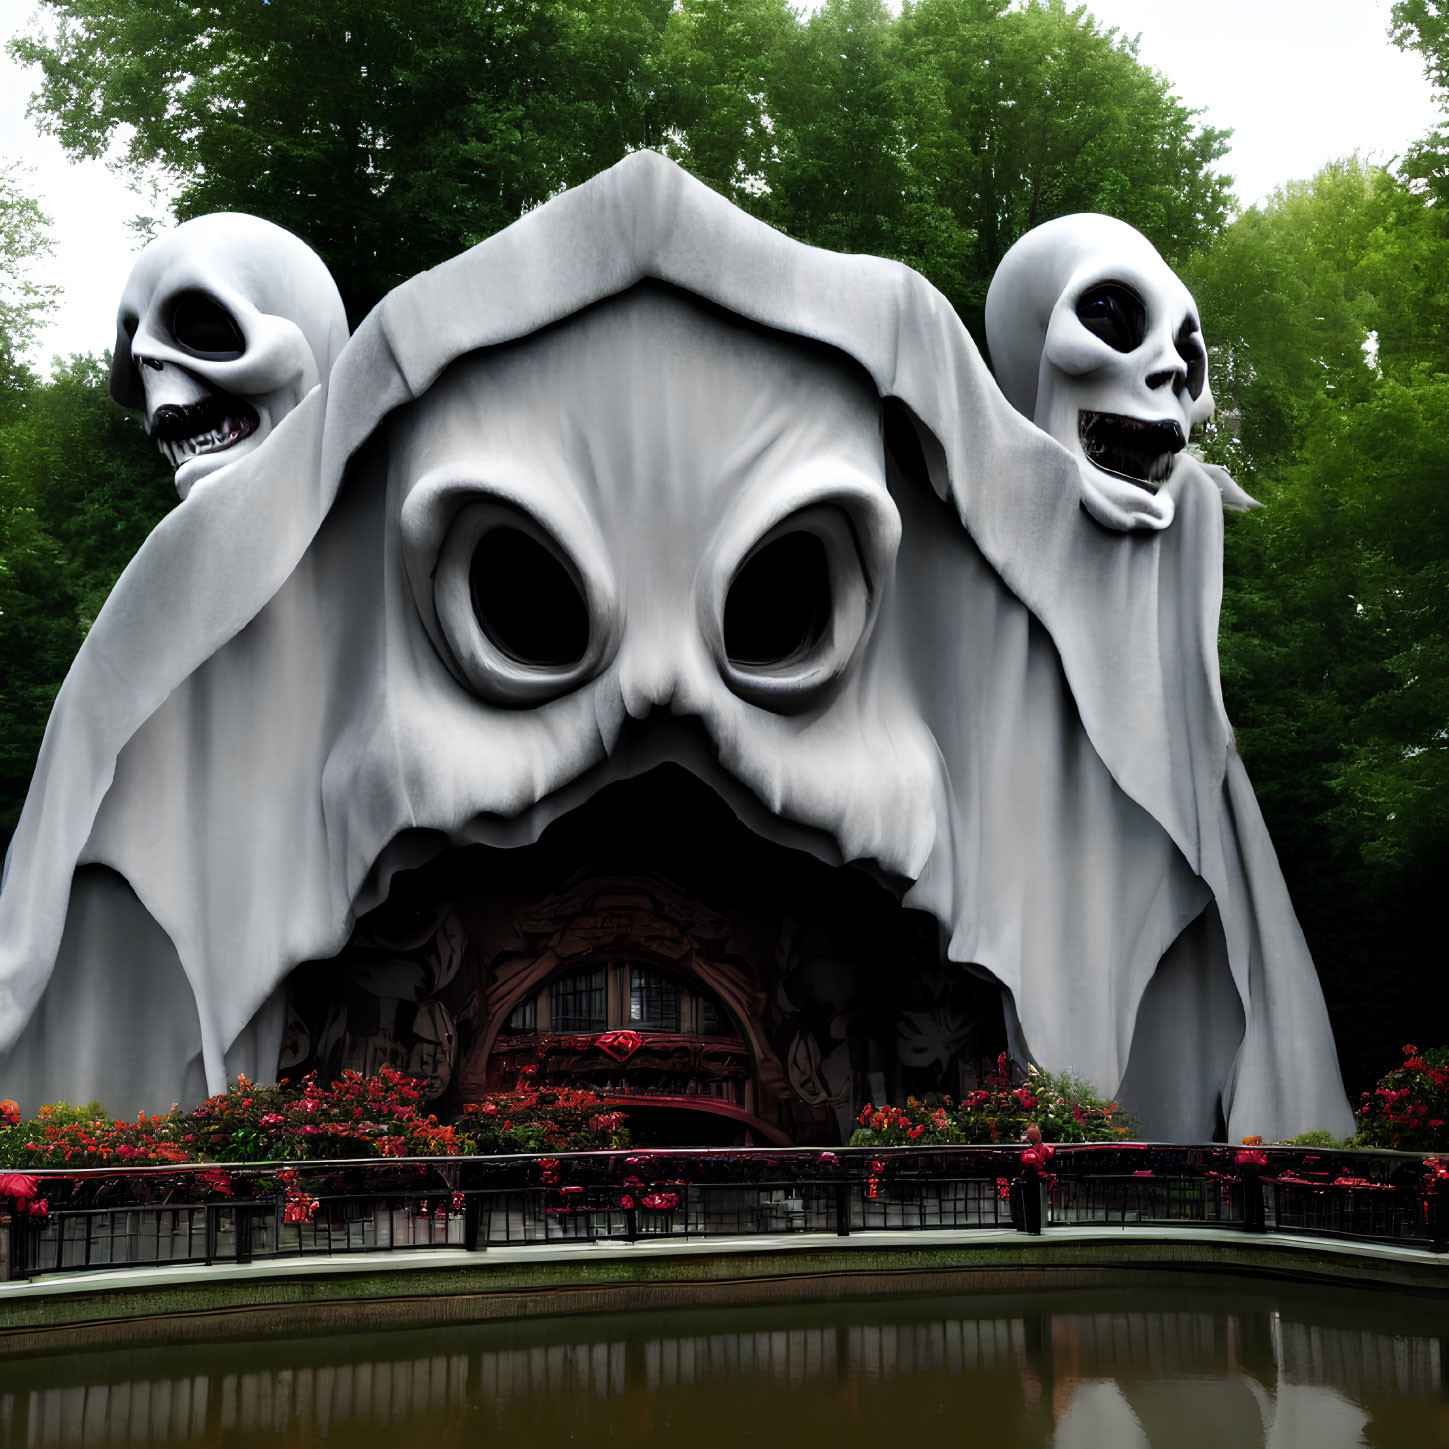 Ghostly Face Building with Screaming Skulls Surrounded by Greenery